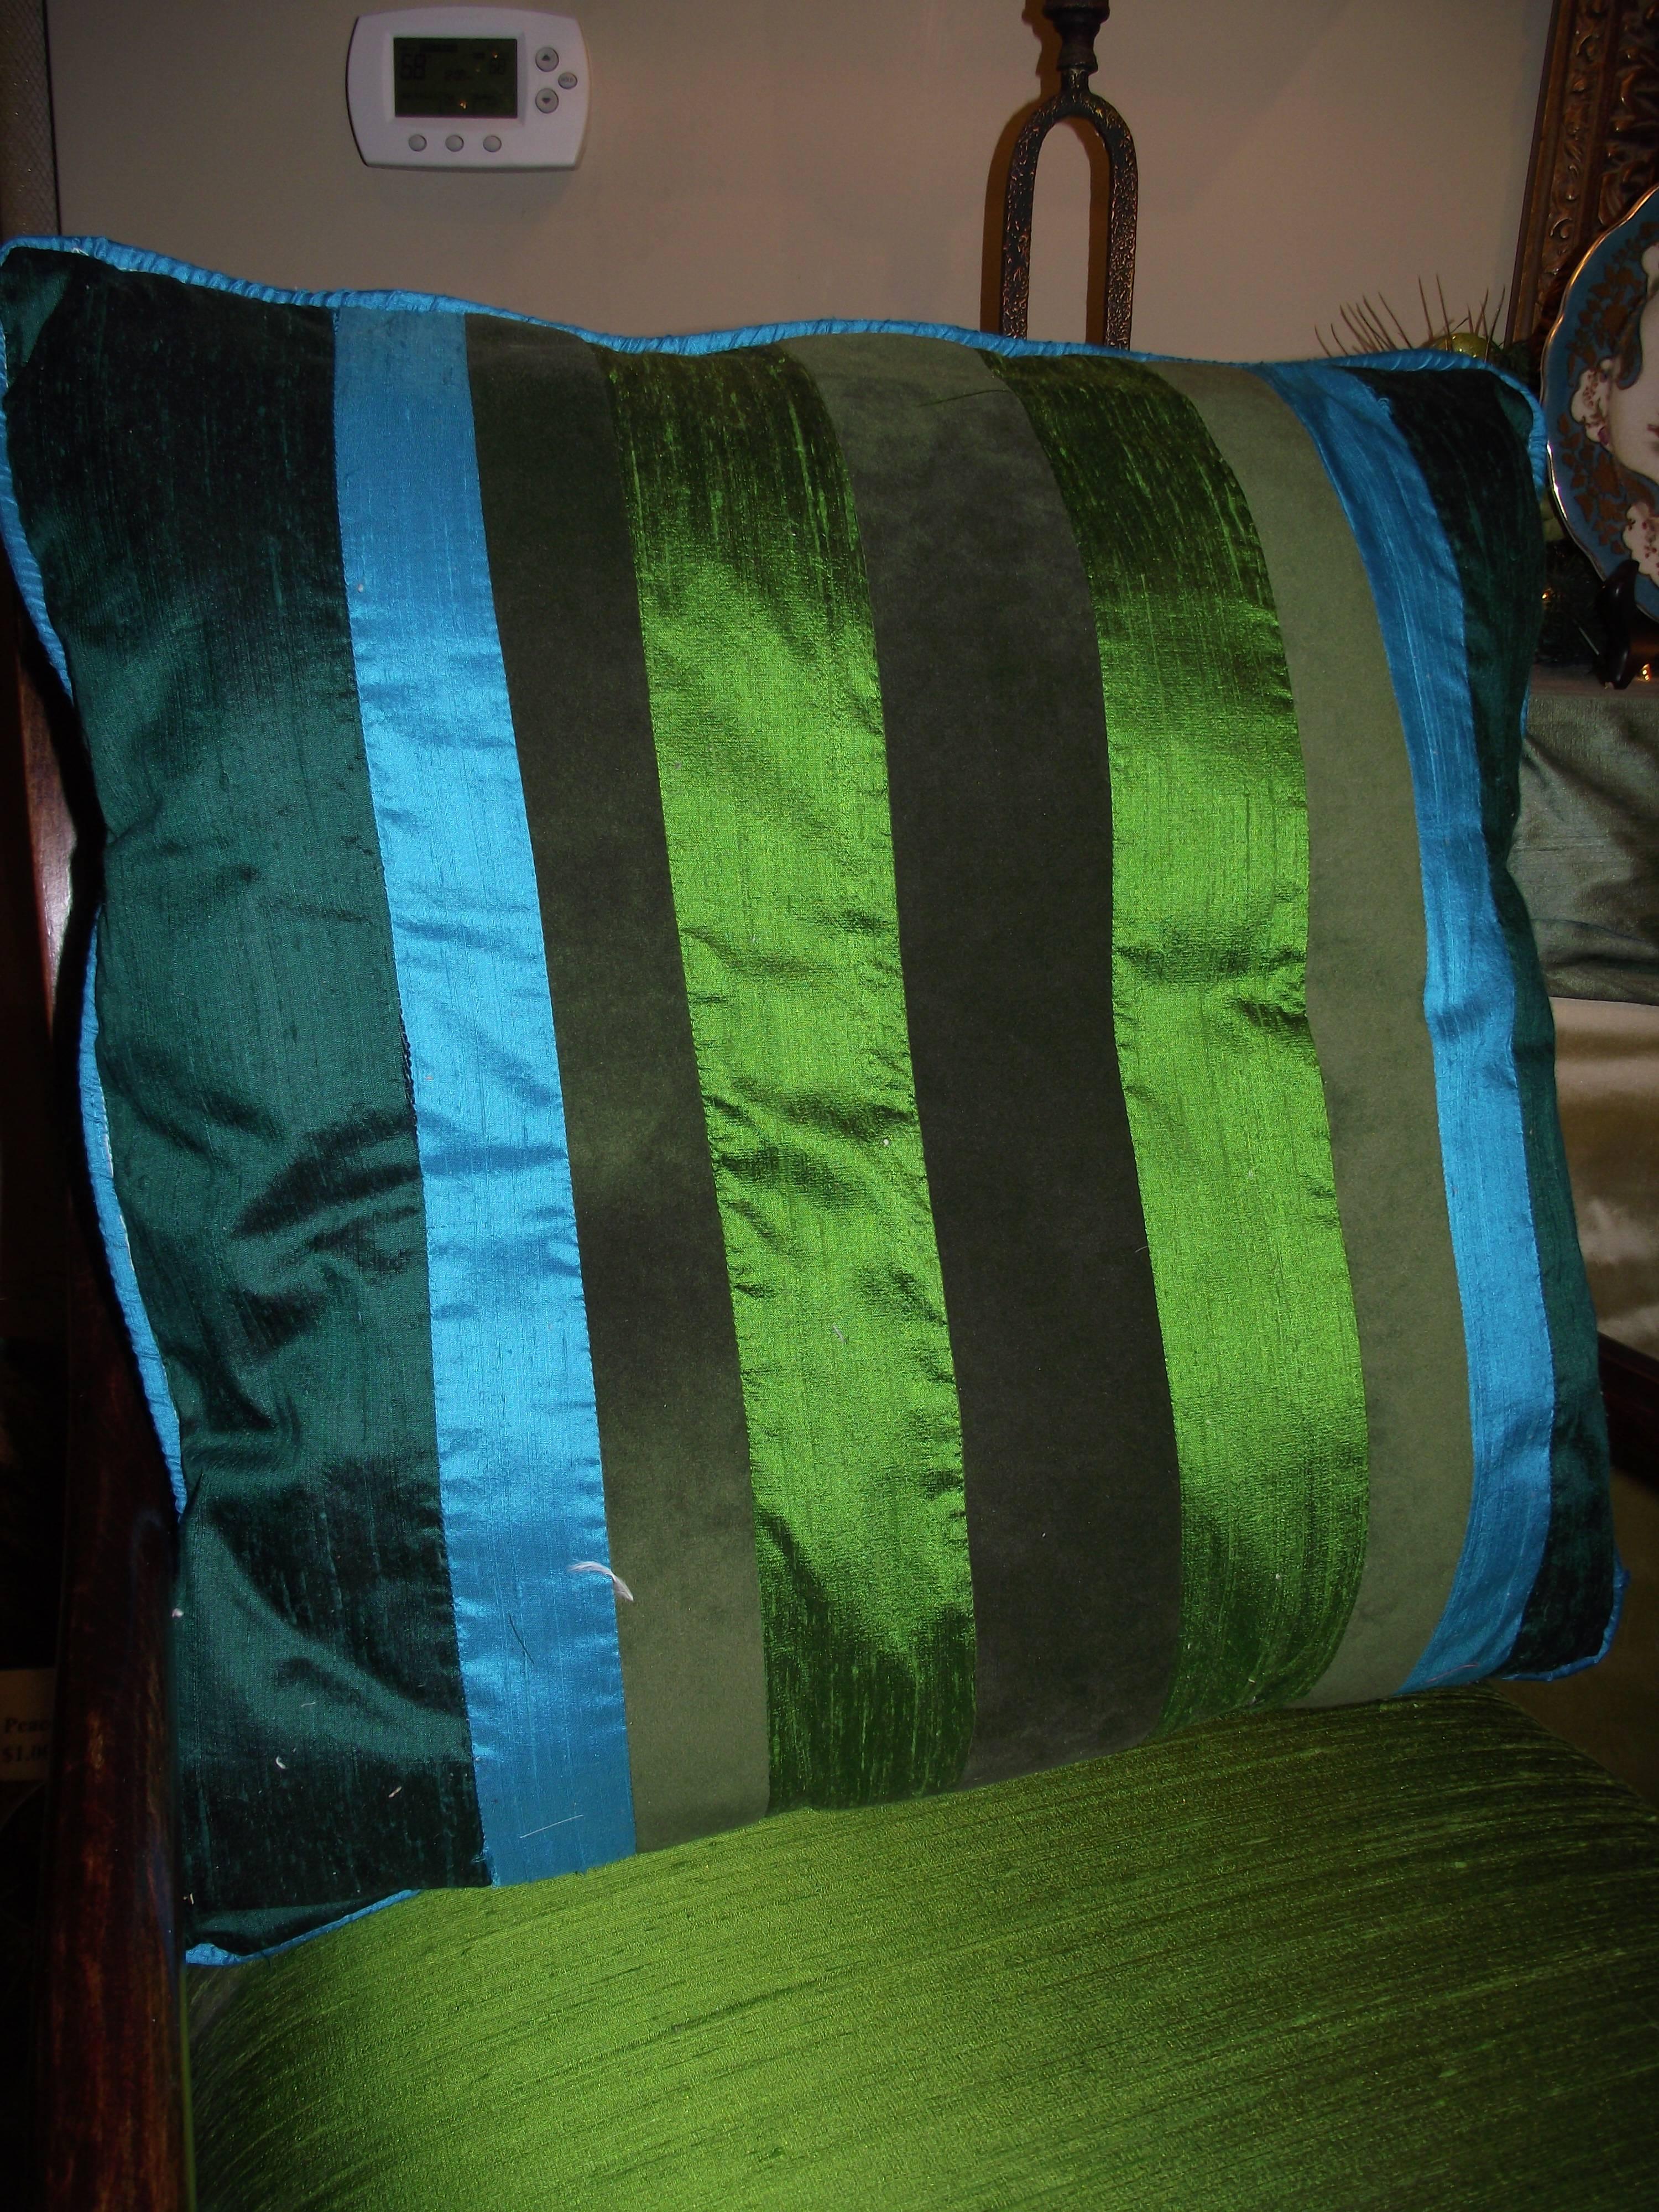 Another original design from GANTT Design Studio, this unusual and beautiful pillow features colors taken directly from a peacock feather. The textures of shantung silk and velvet are combined in the pillow cover. The soft polyester bat pillow form